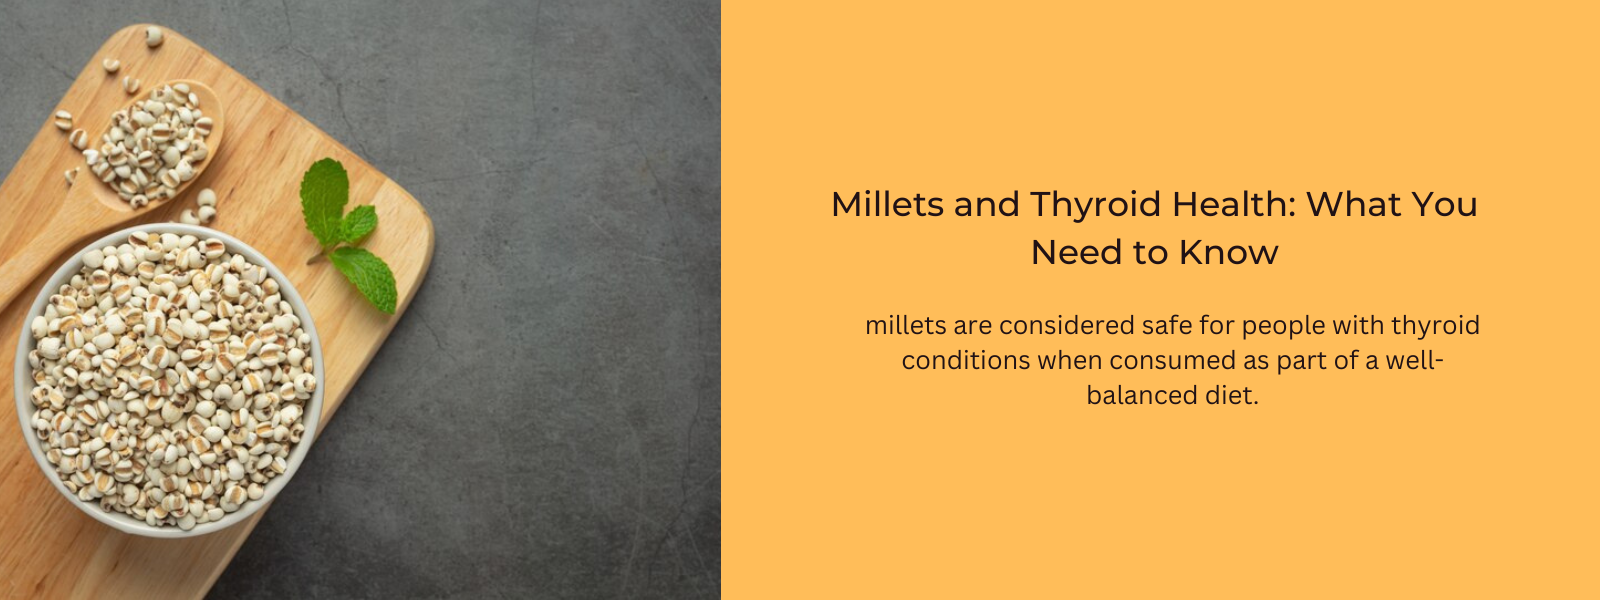 Millets and Thyroid Health: What You Need to Know